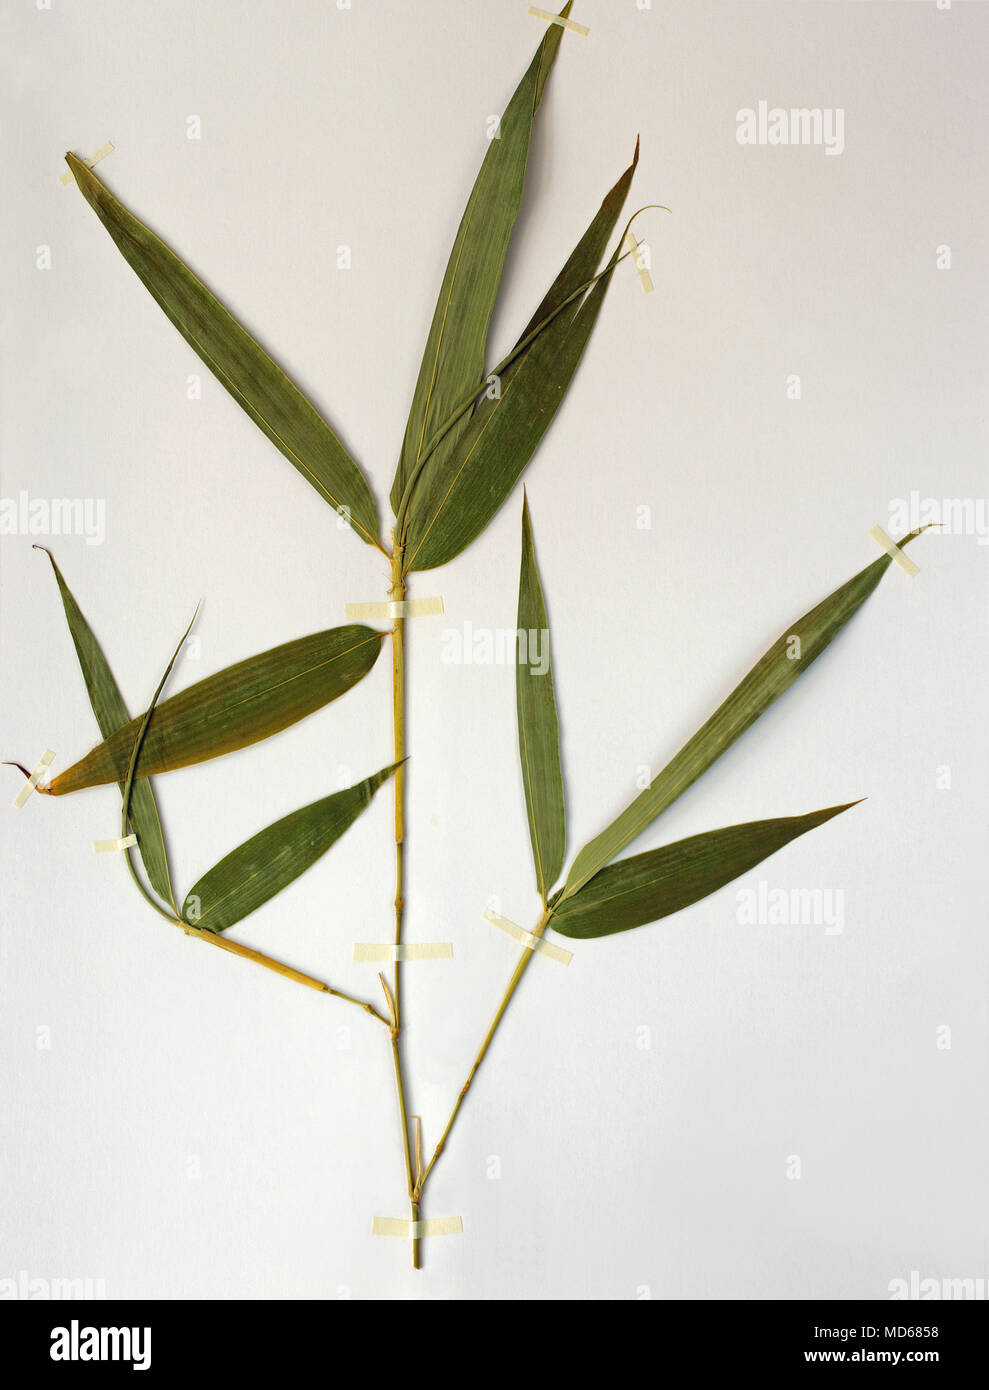 Herbarium sheet with Phyllostachys  bissetii, Bamboo, grassfamily Poaceae Stock Photo